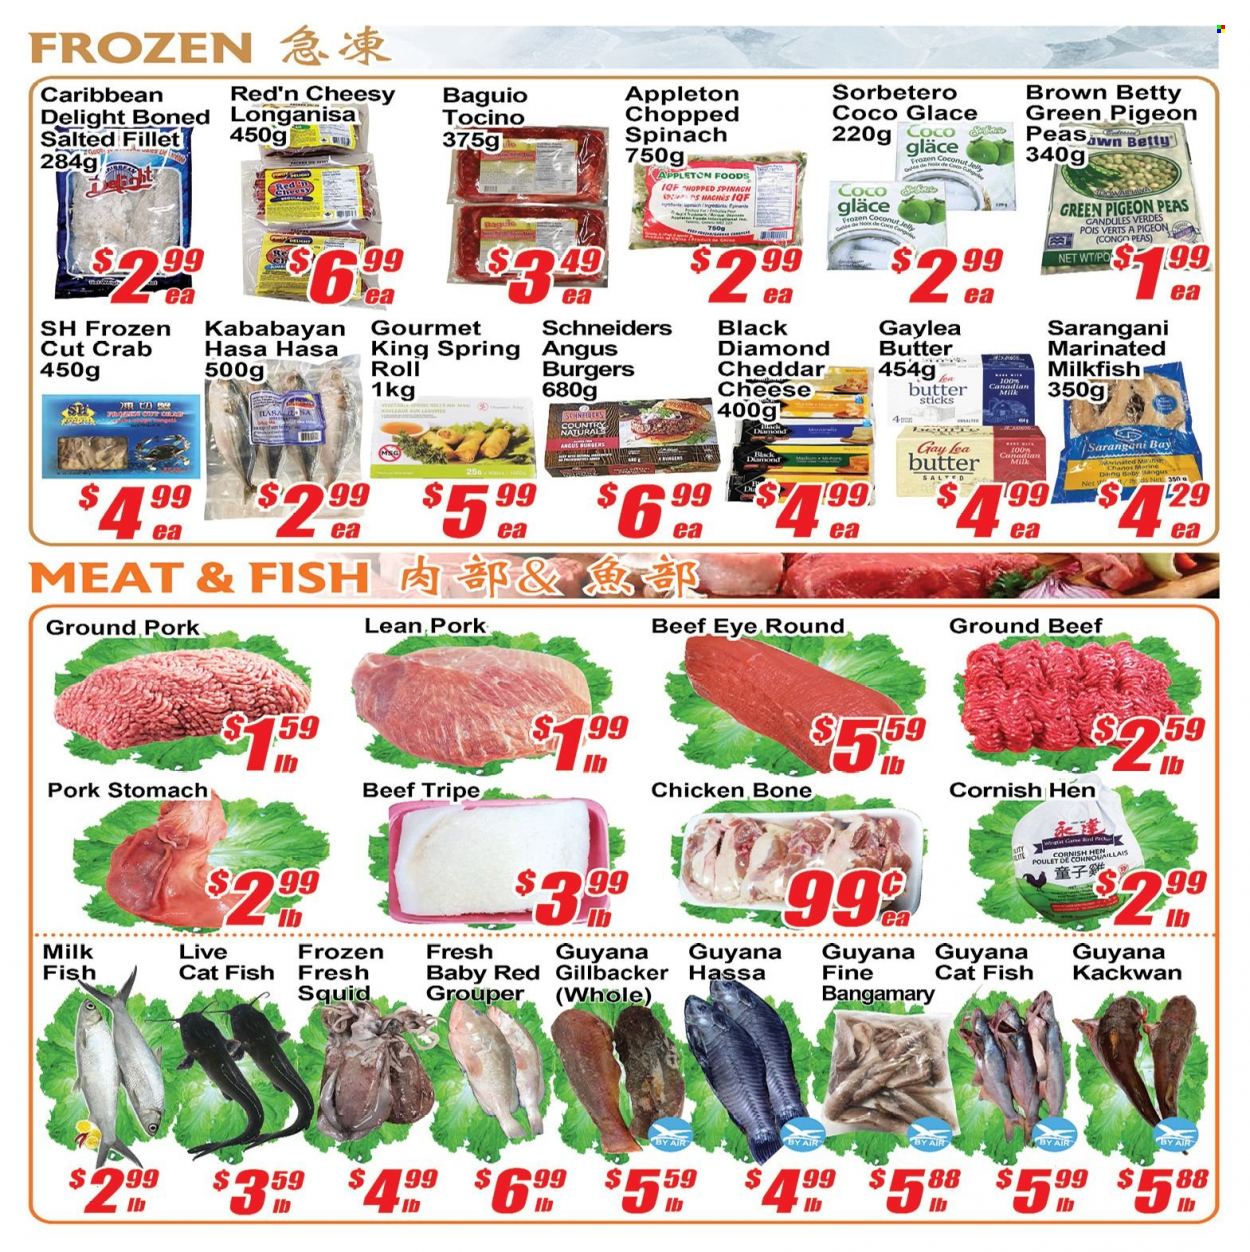 thumbnail - Jian Hing Supermarket Flyer - May 13, 2022 - May 19, 2022 - Sales products - spinach, peas, grouper, squid, crab, fish, milkfish, hamburger, cheese, milk, butter, jelly, toor dal, cornish hen, beef meat, beef tripe, ground beef, eye of round, ground pork. Page 2.